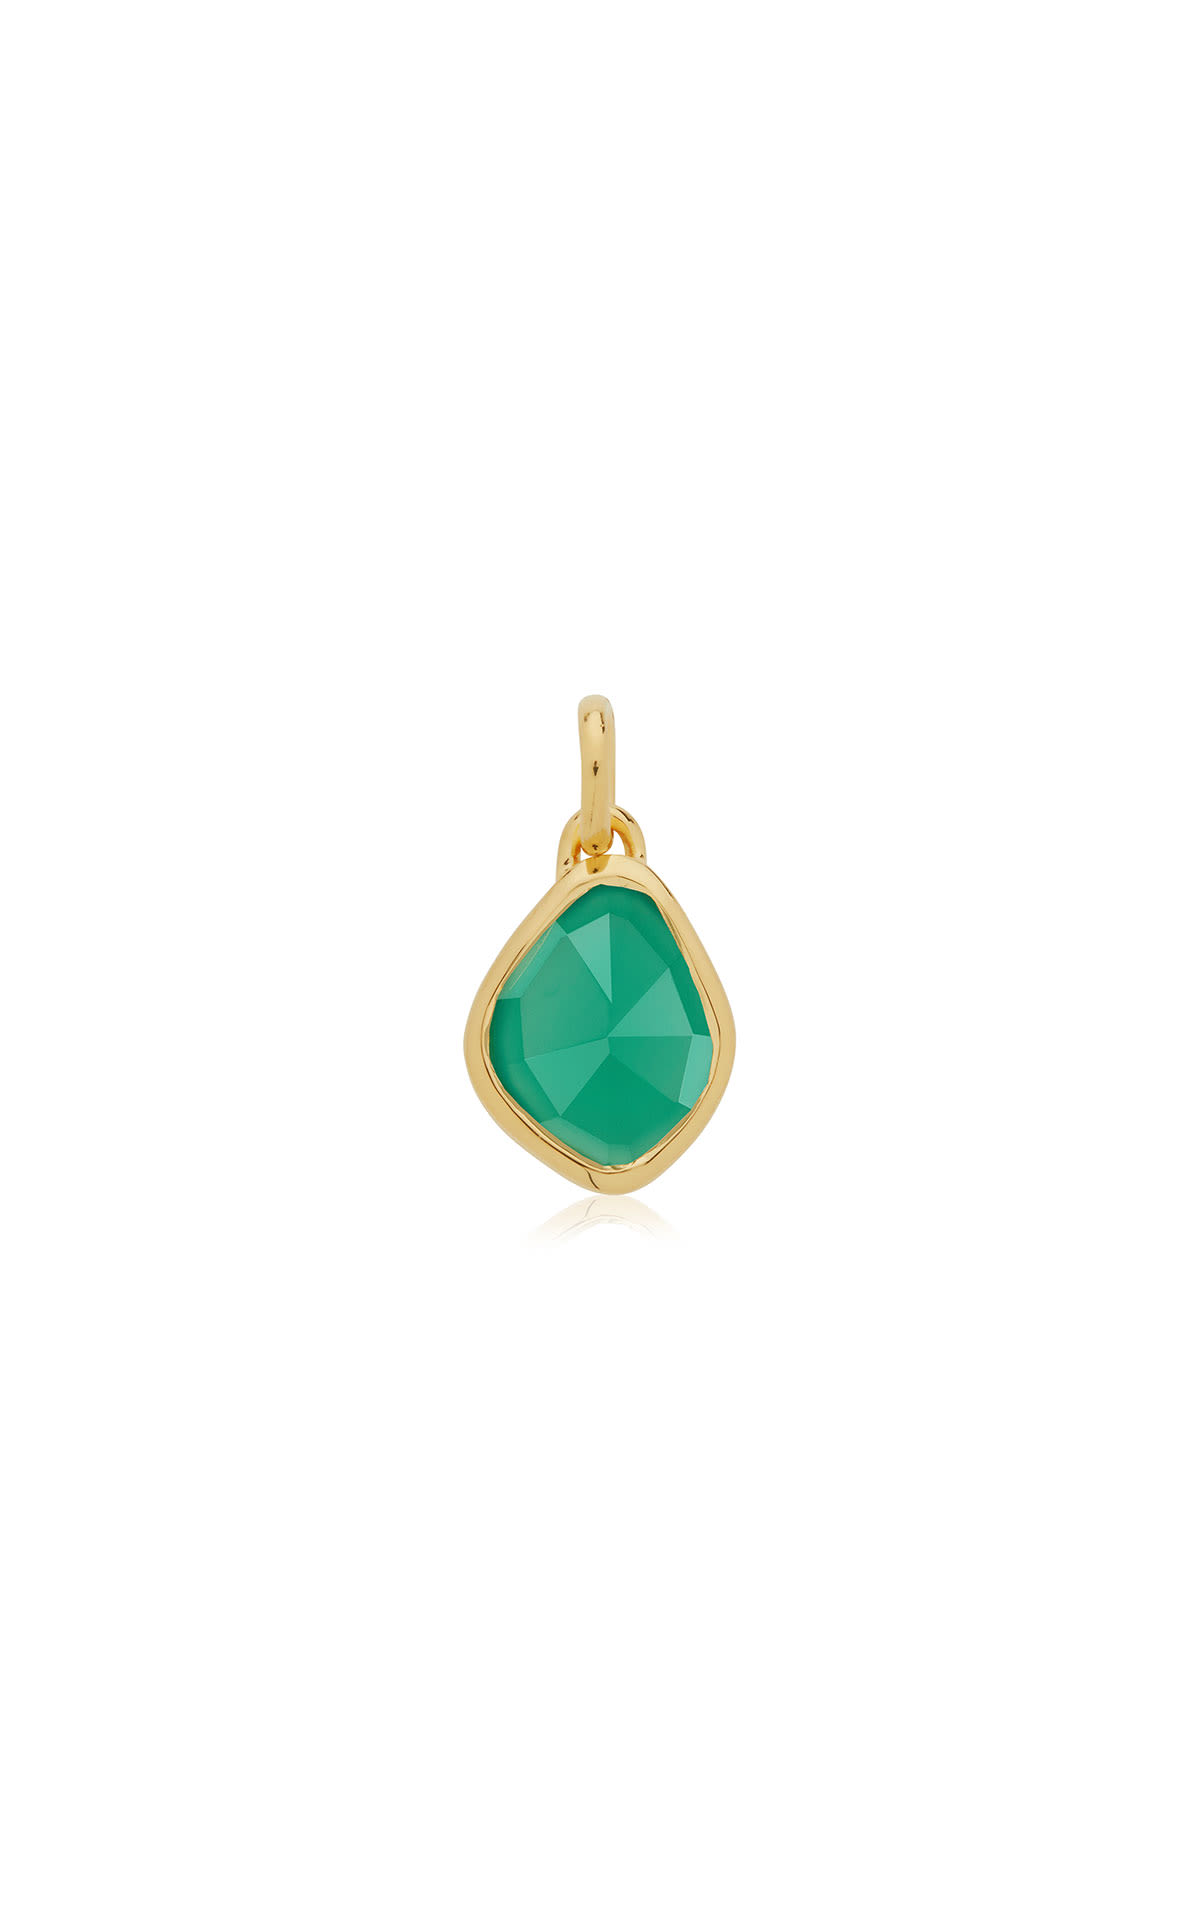 Monica Vinader GP Siren small nugget pendant charm green onyx from Bicester Village